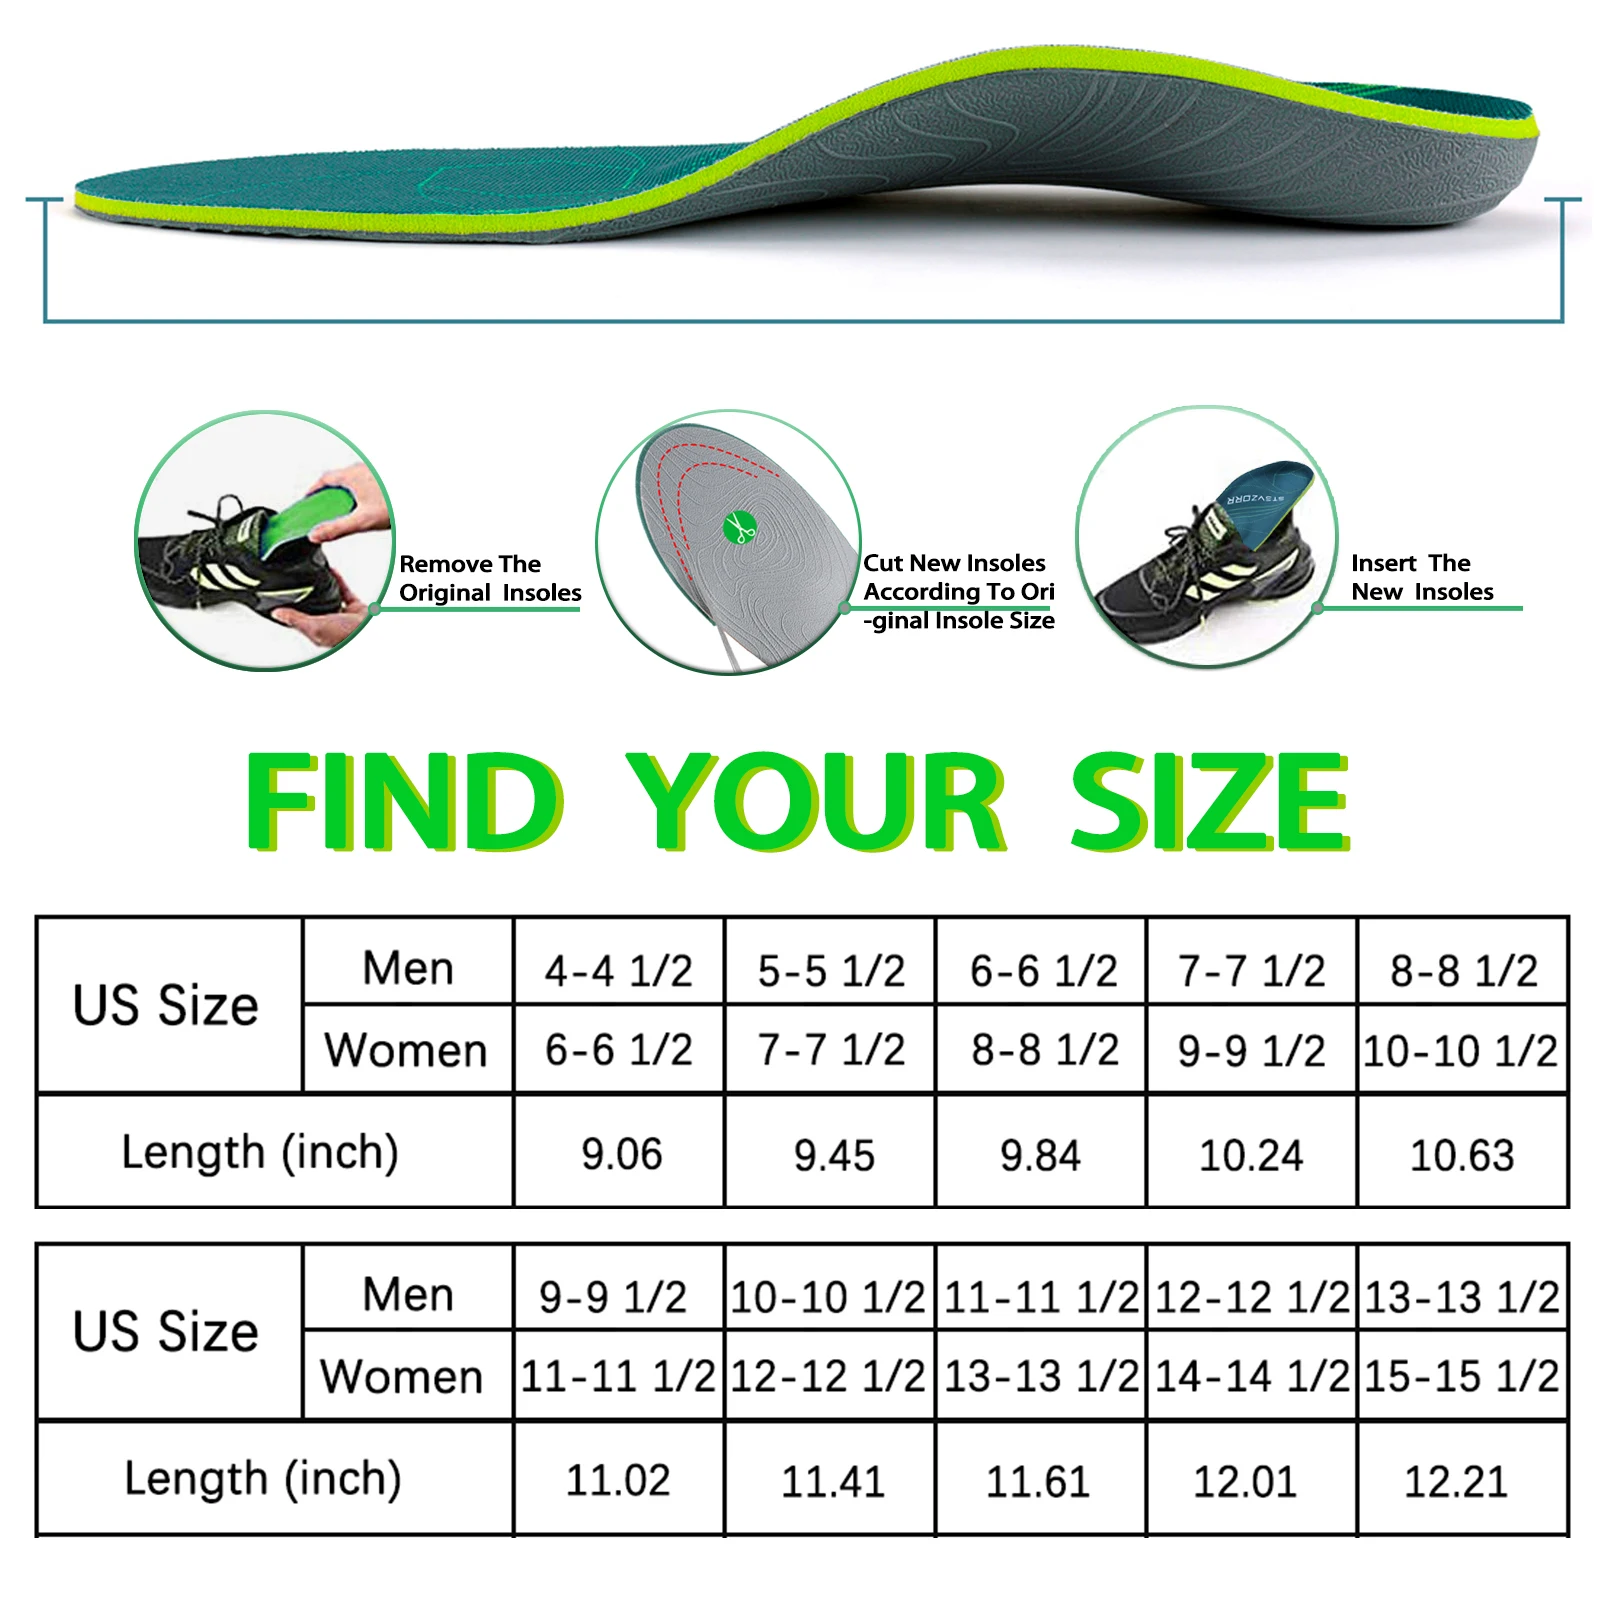 Flat Feet Template Arch Support Orthopedic Insoles,Men Women Plantar Fasciitis Heel Pain Orthotics Insoles Sneakers Shoe Inserts images - 6